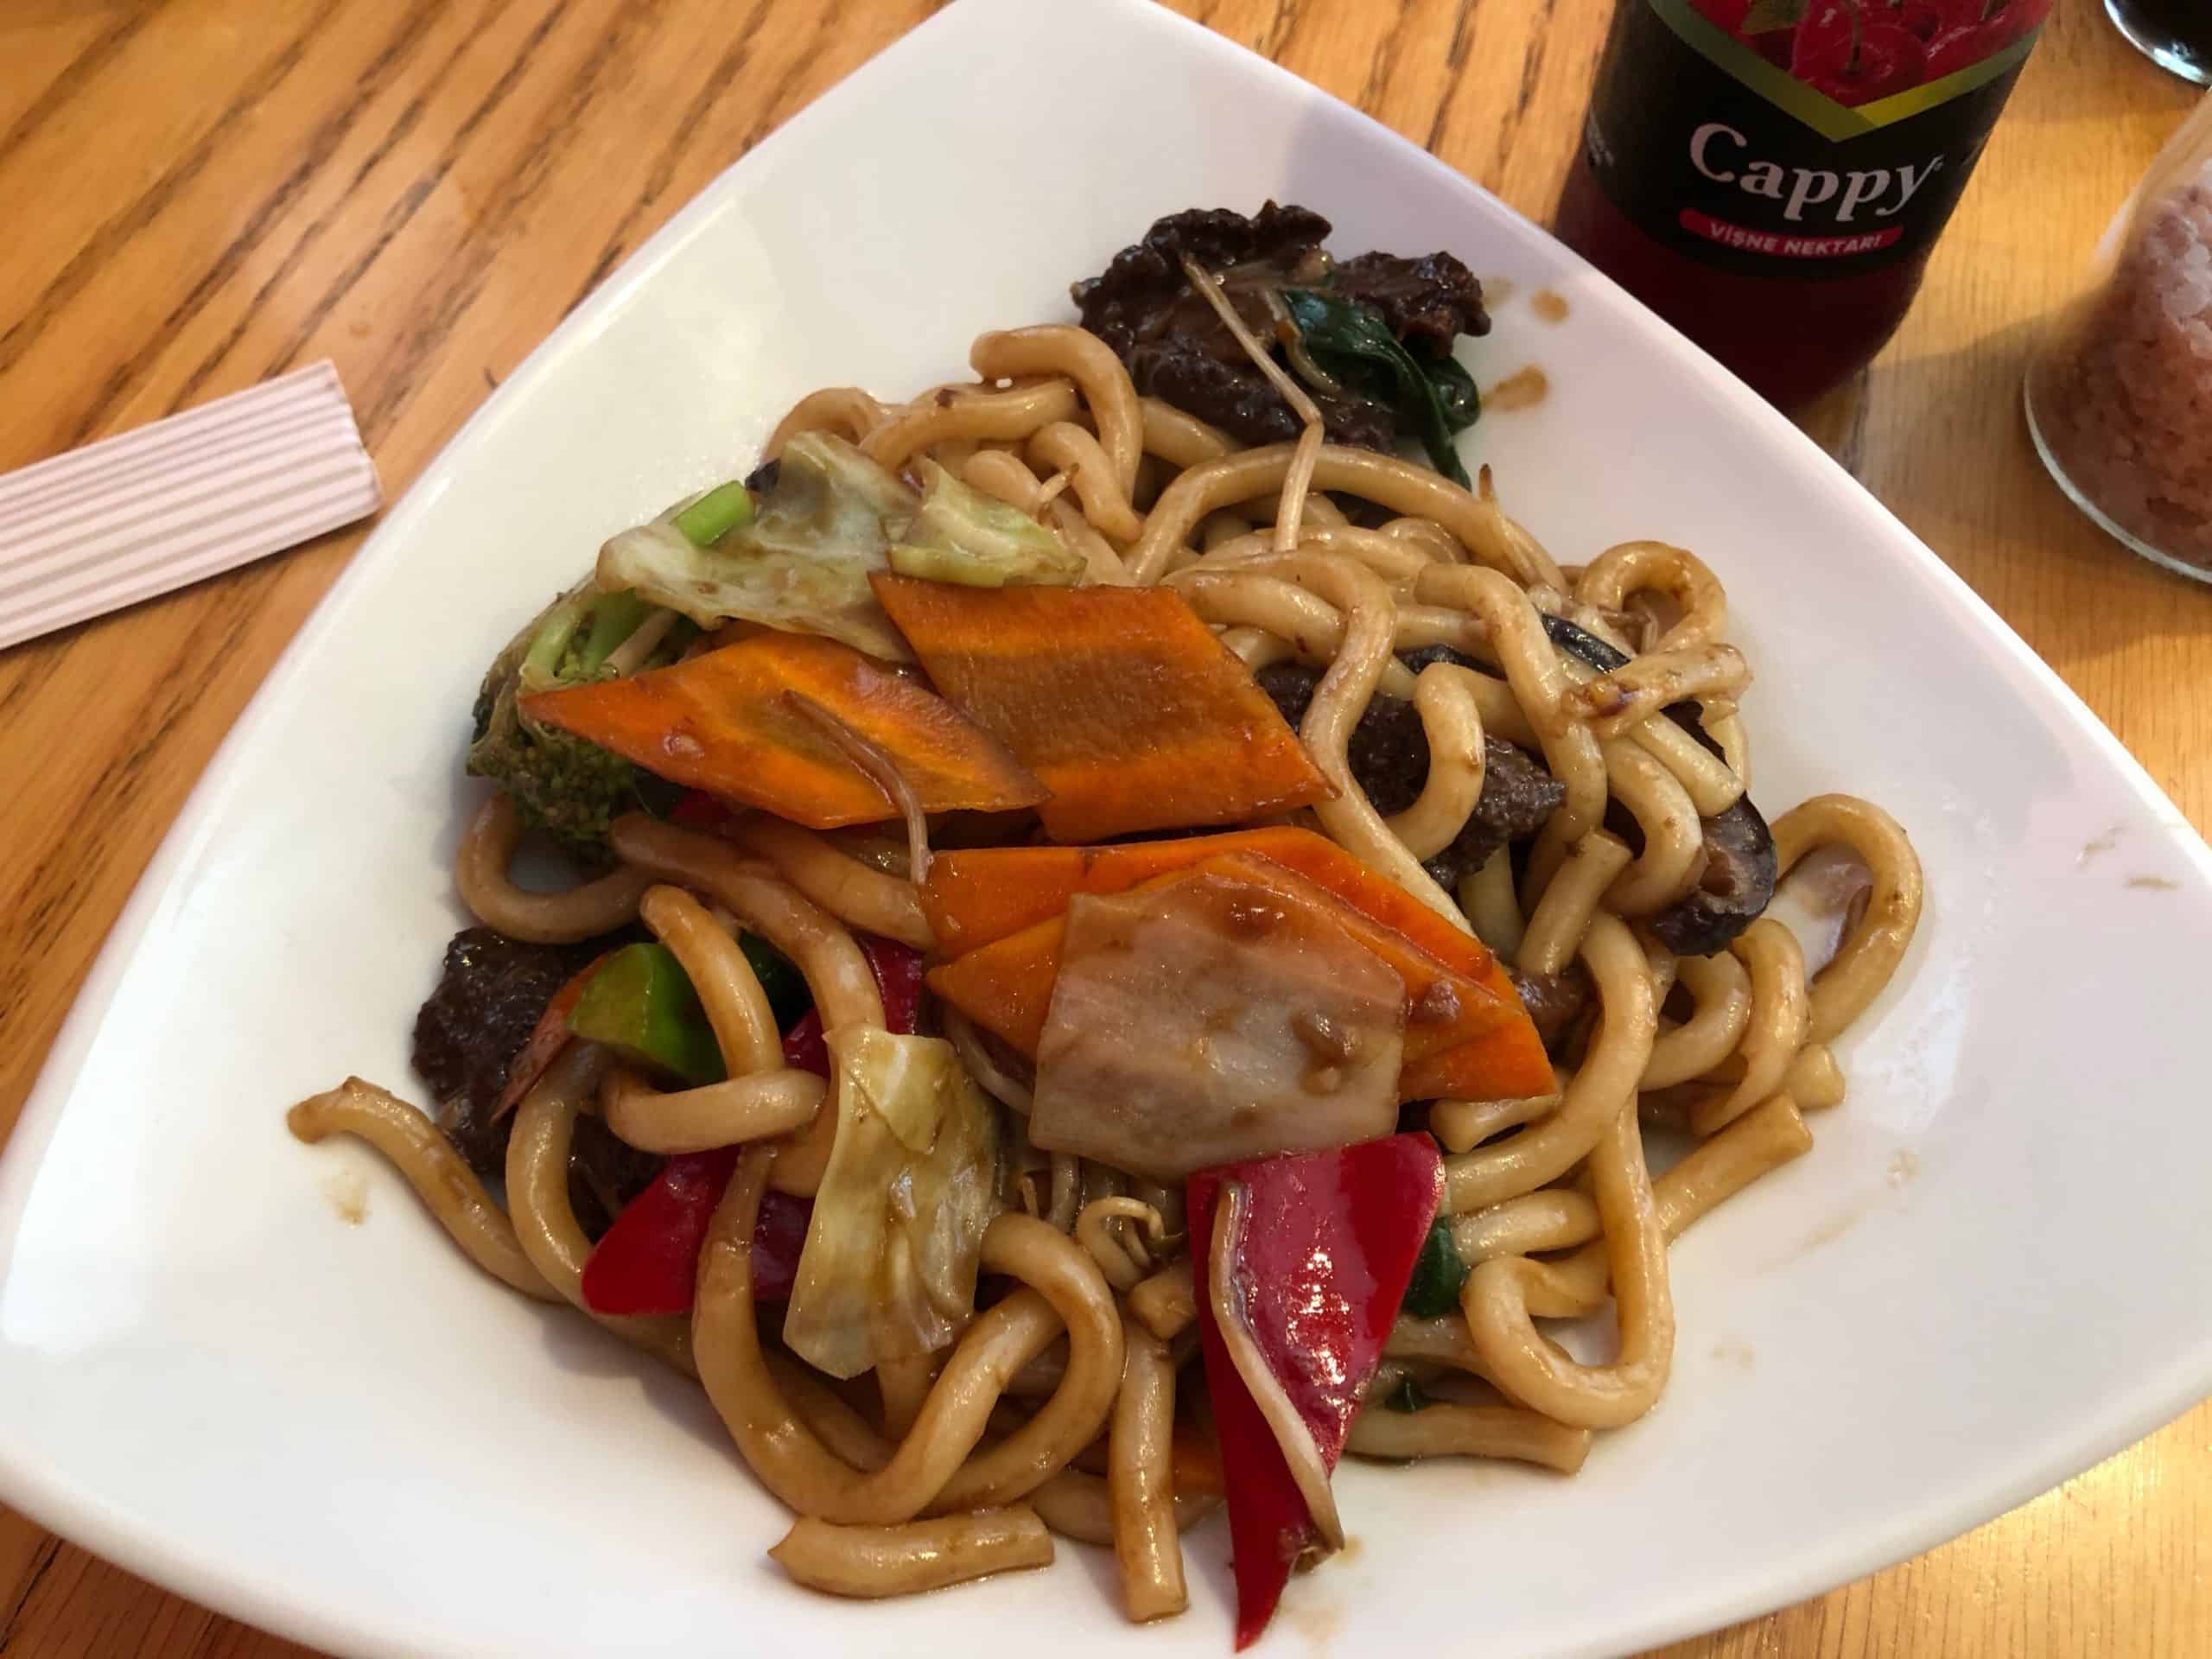 Chicken and vegetable noodles at Sushi Express